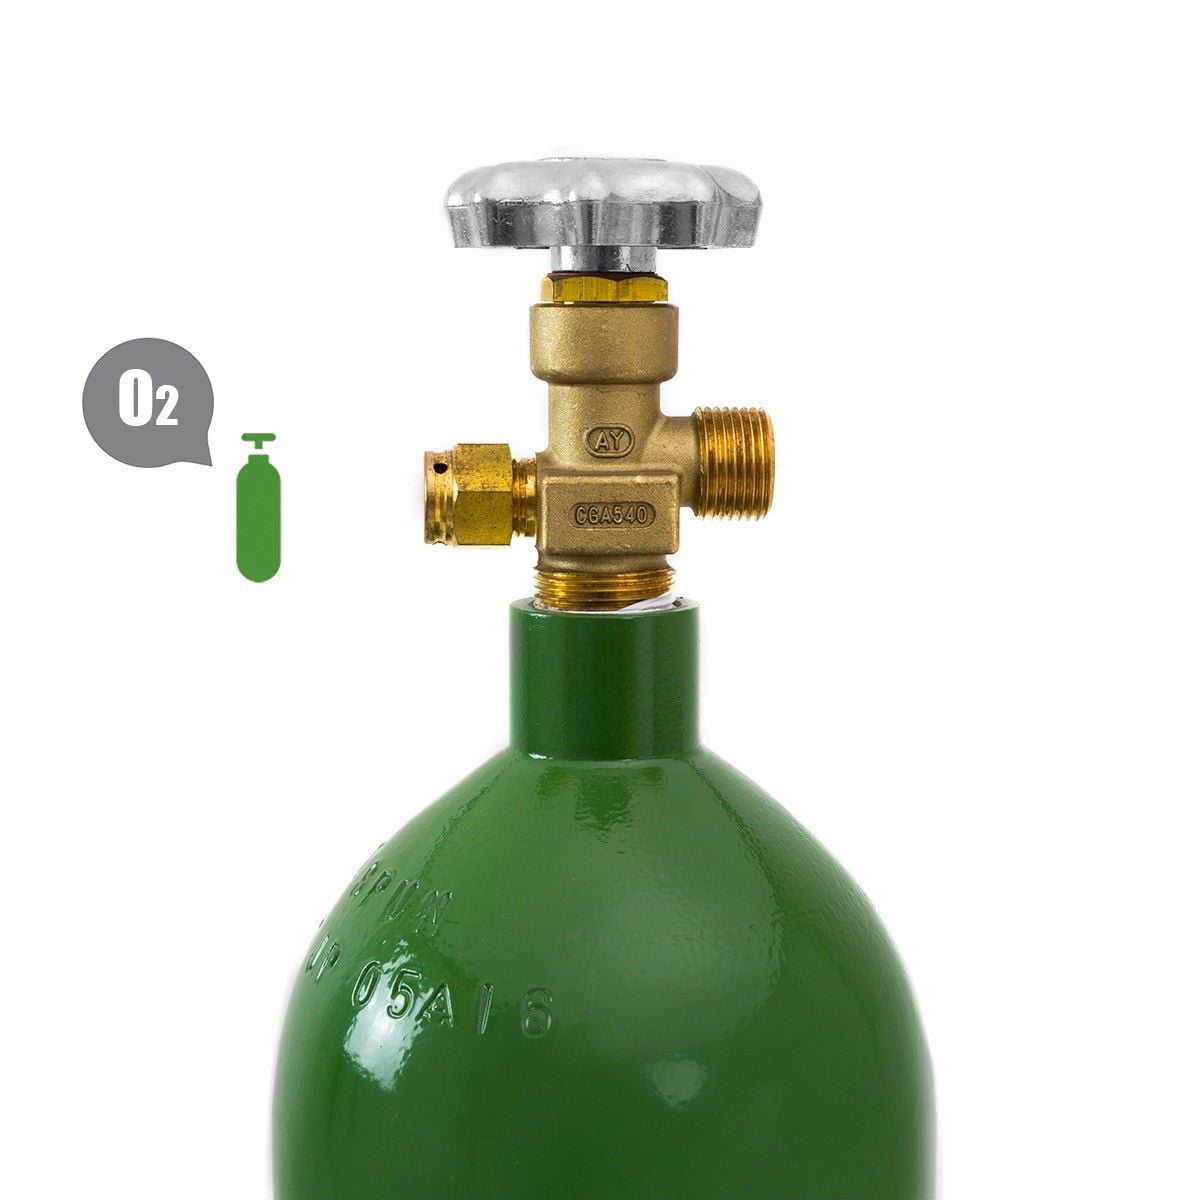 Oxygen Tank For Sale Near Me : Oxygen E Cylinder 682 Liter With Toggle 8048 For Sale Online Ebay ...